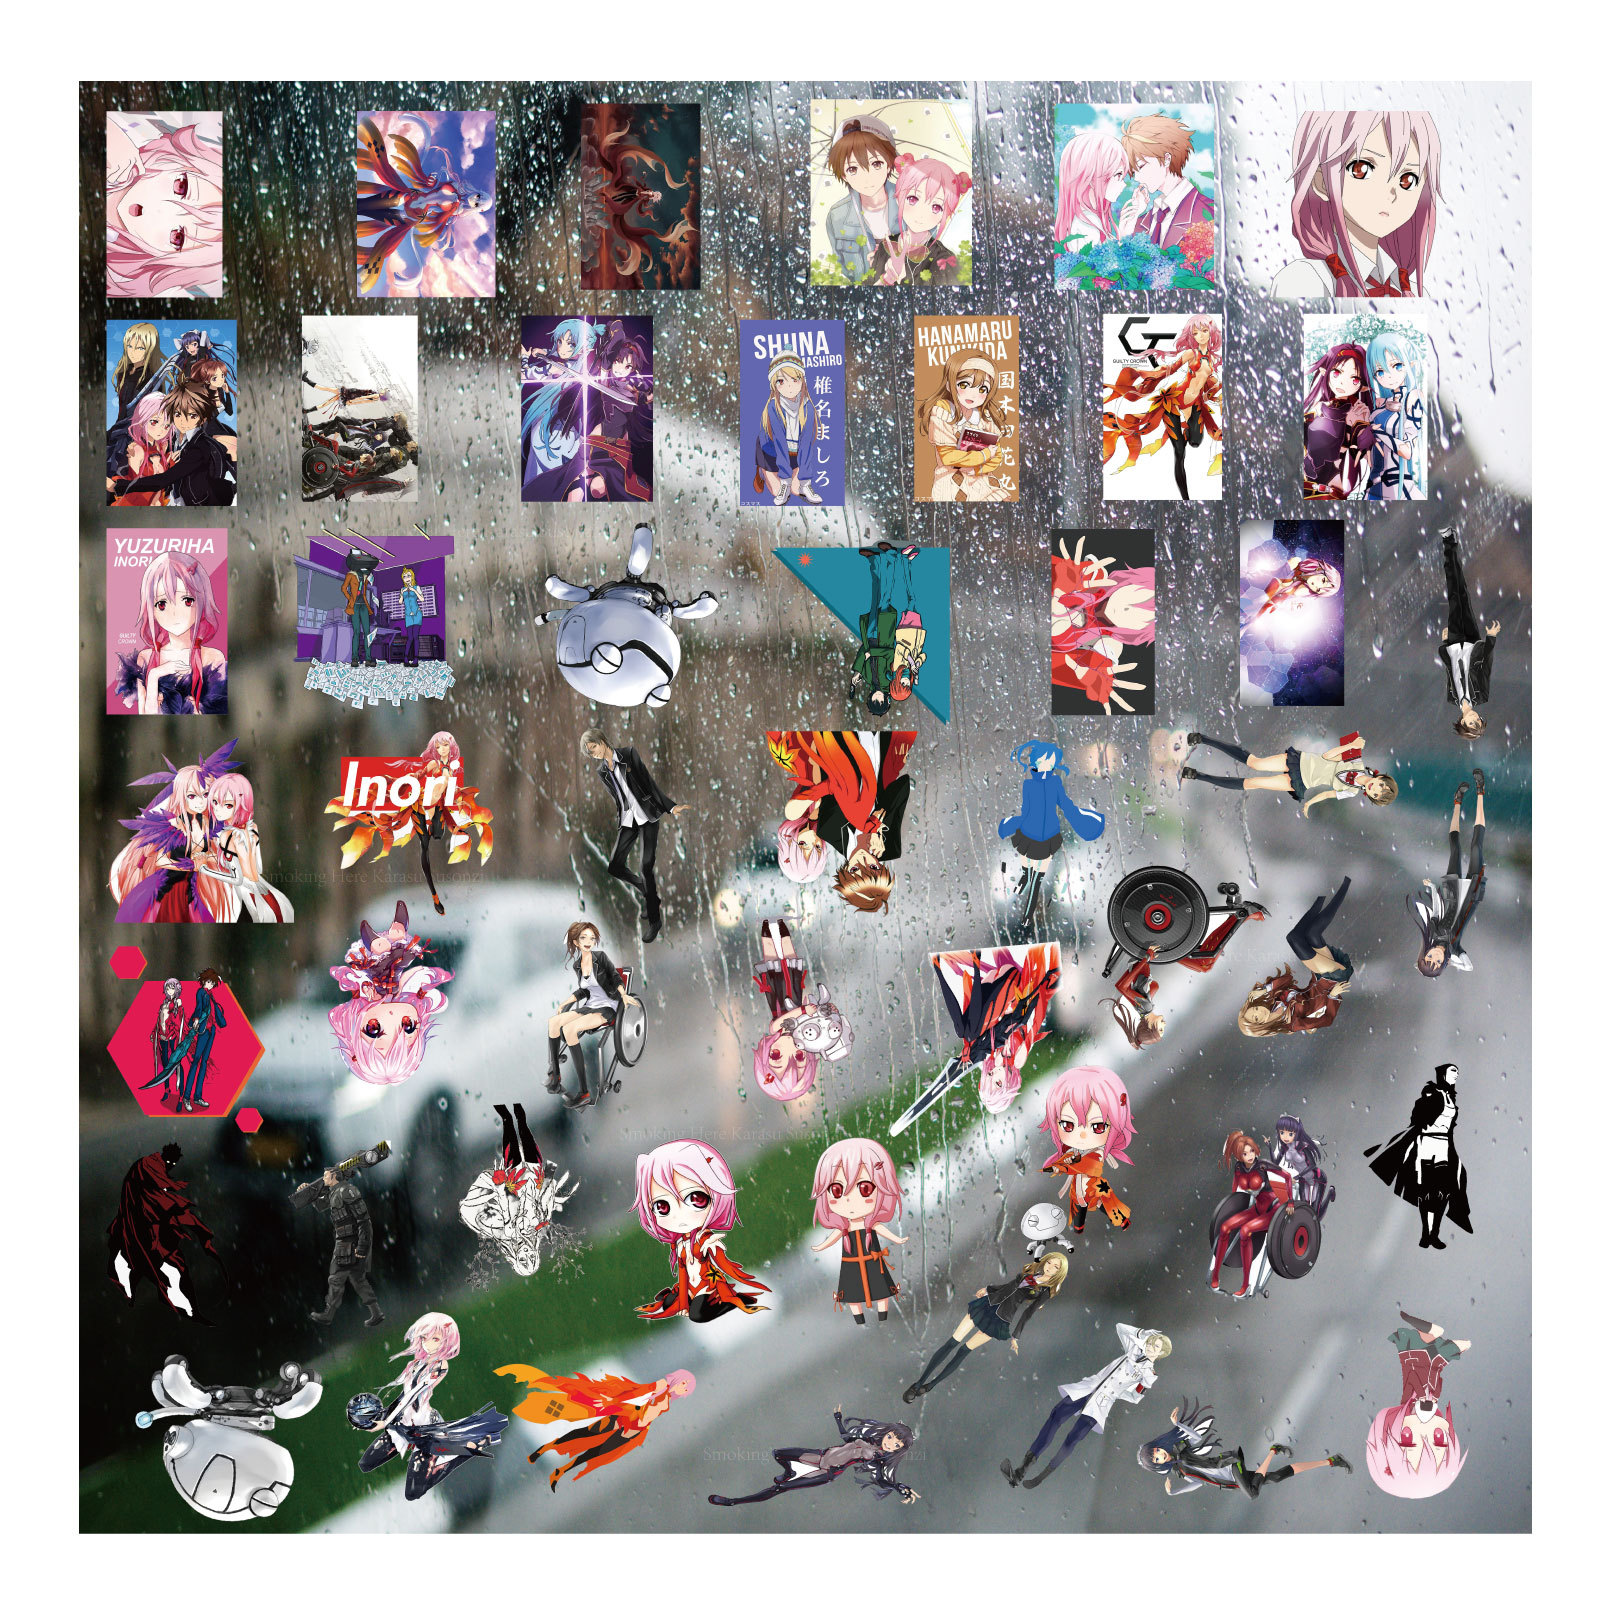 Guilty crown anime 3D sticker price for a set of 50pcs